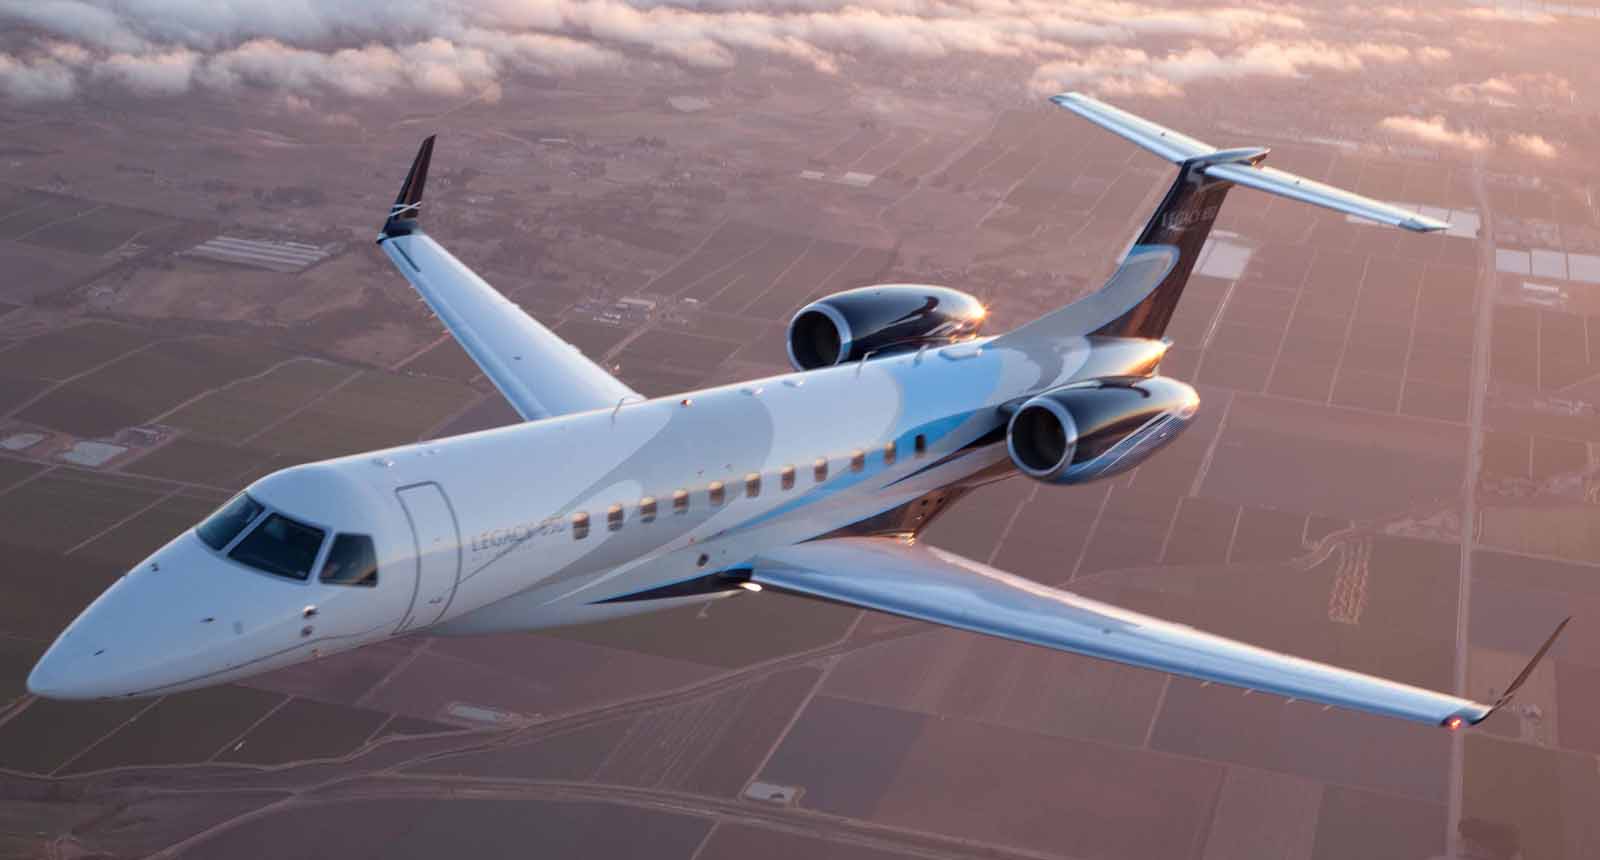 Embraer Executive Jets Delivers 200th Aircraft of the Legacy600/650 Family to China’s Minsheng Financial Leasing